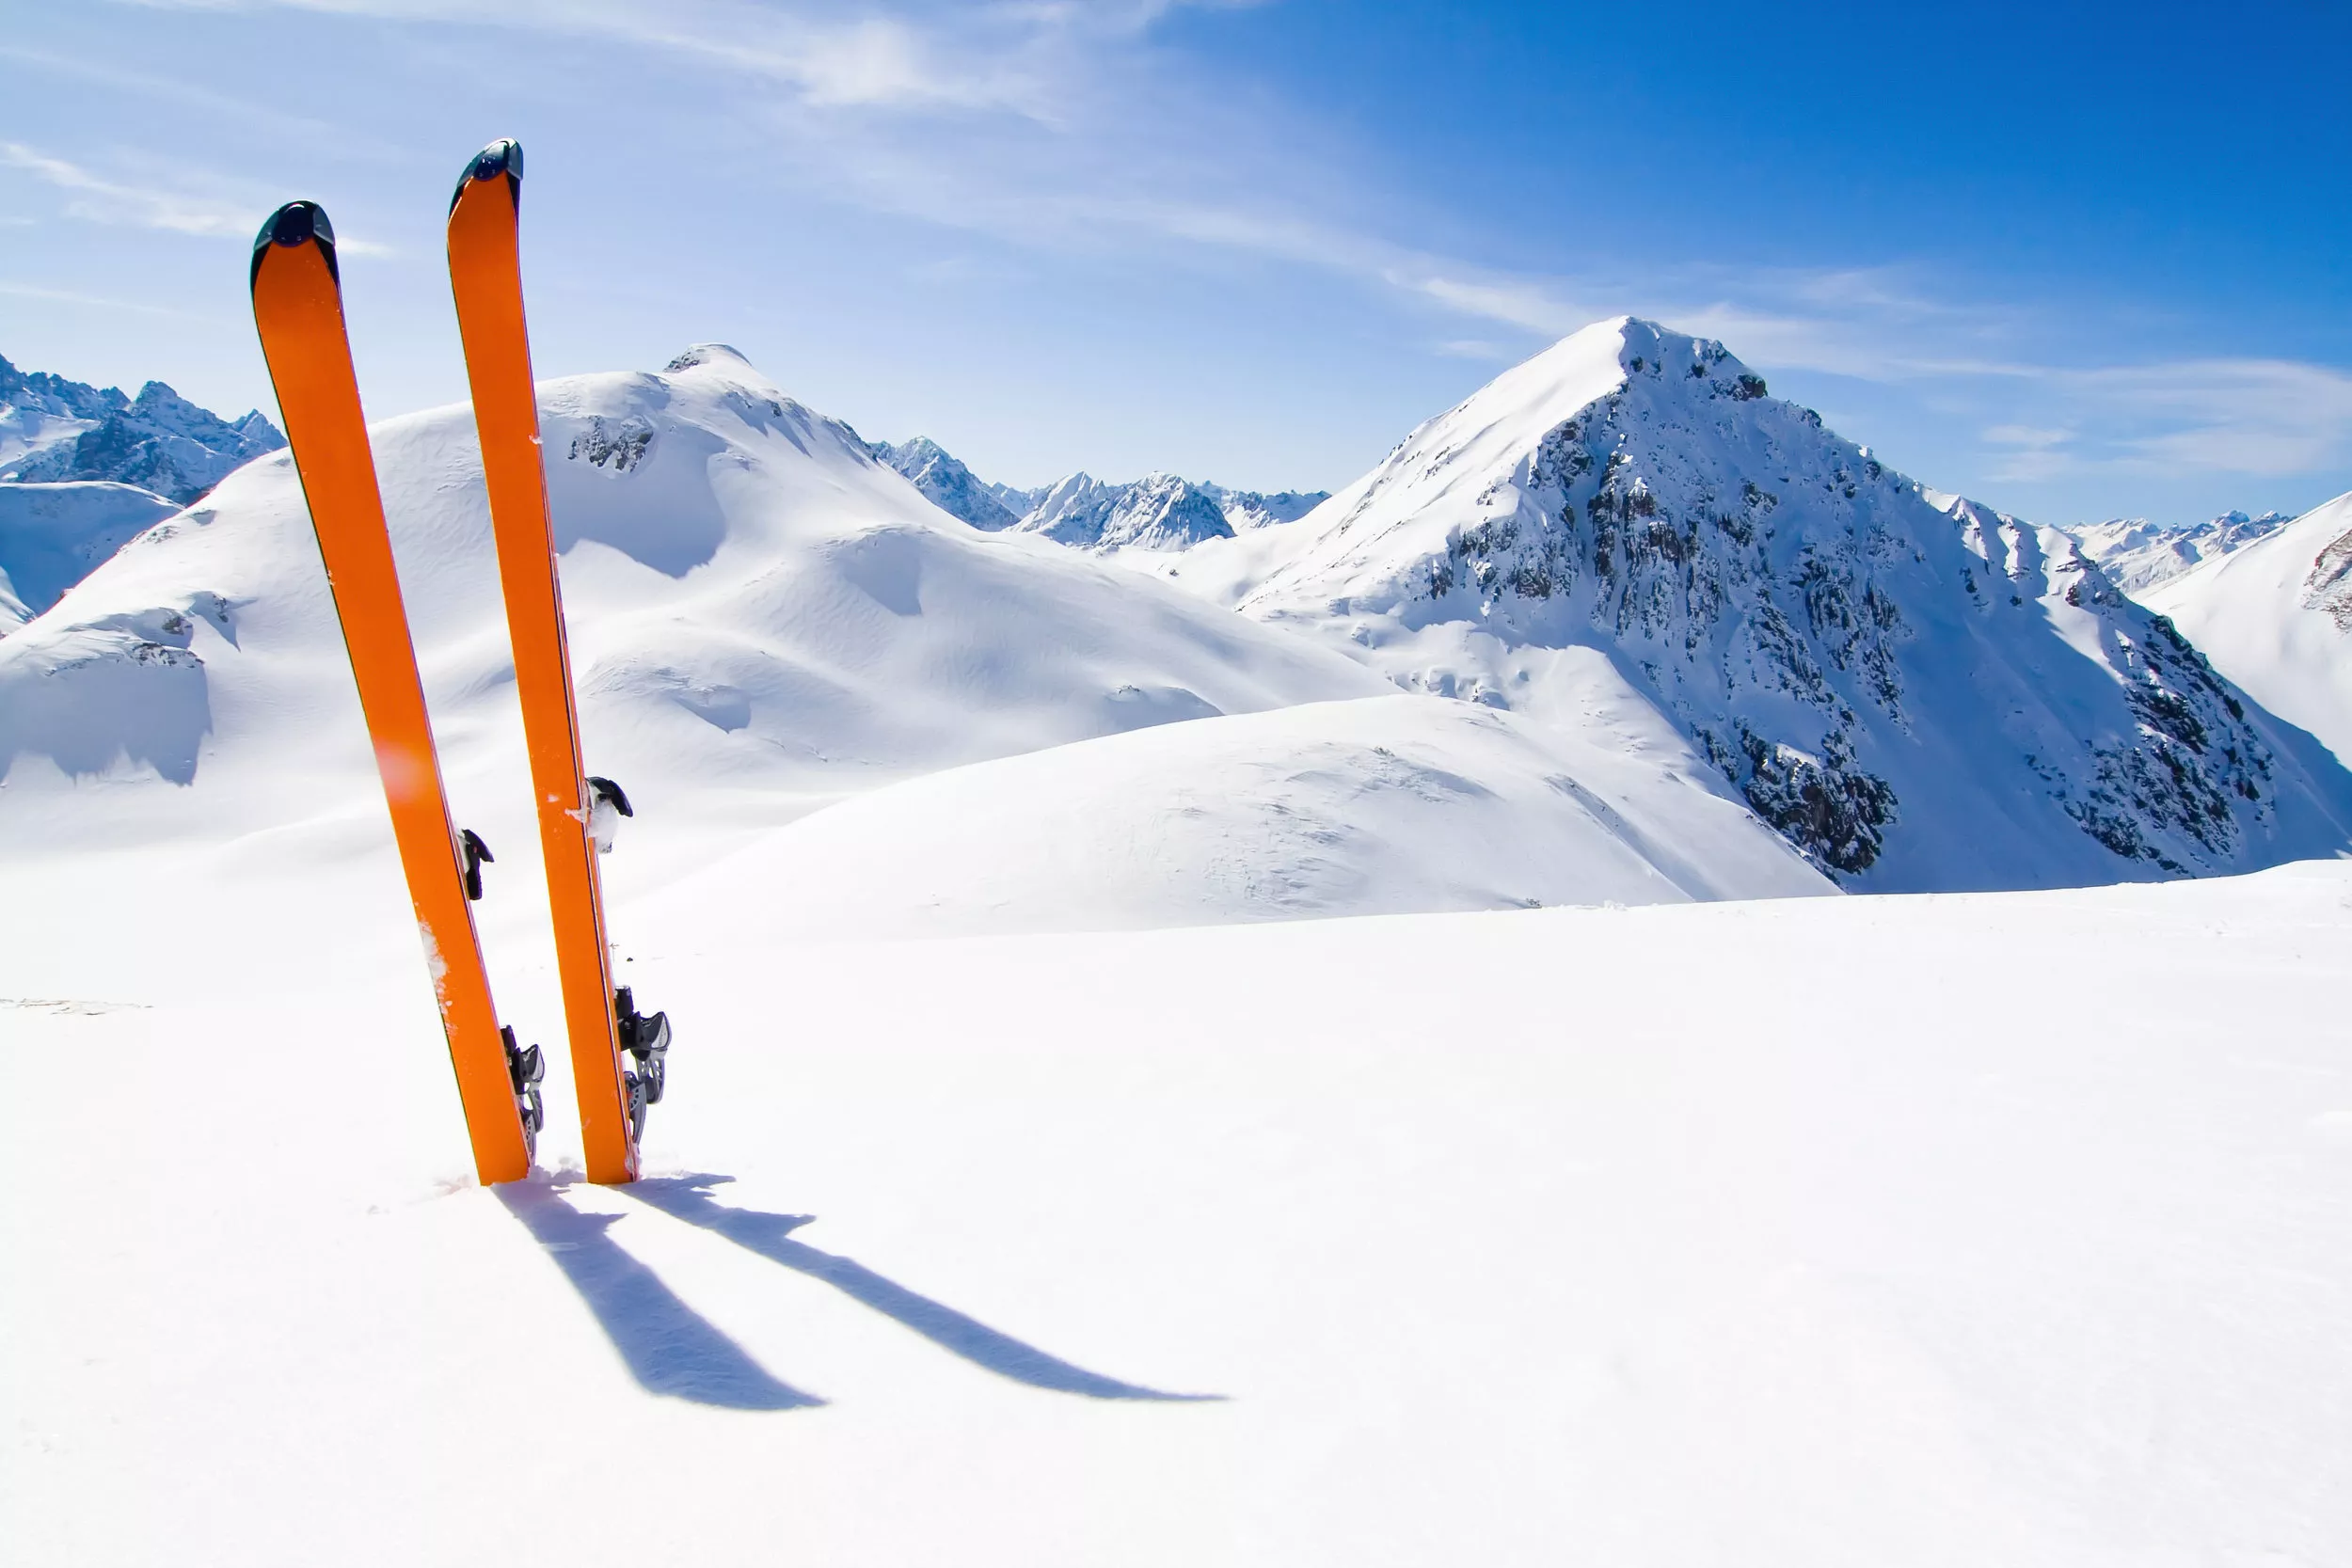 Nevada Ski Rental in Argentina, South America | Snowboarding,Skiing - Rated 0.8